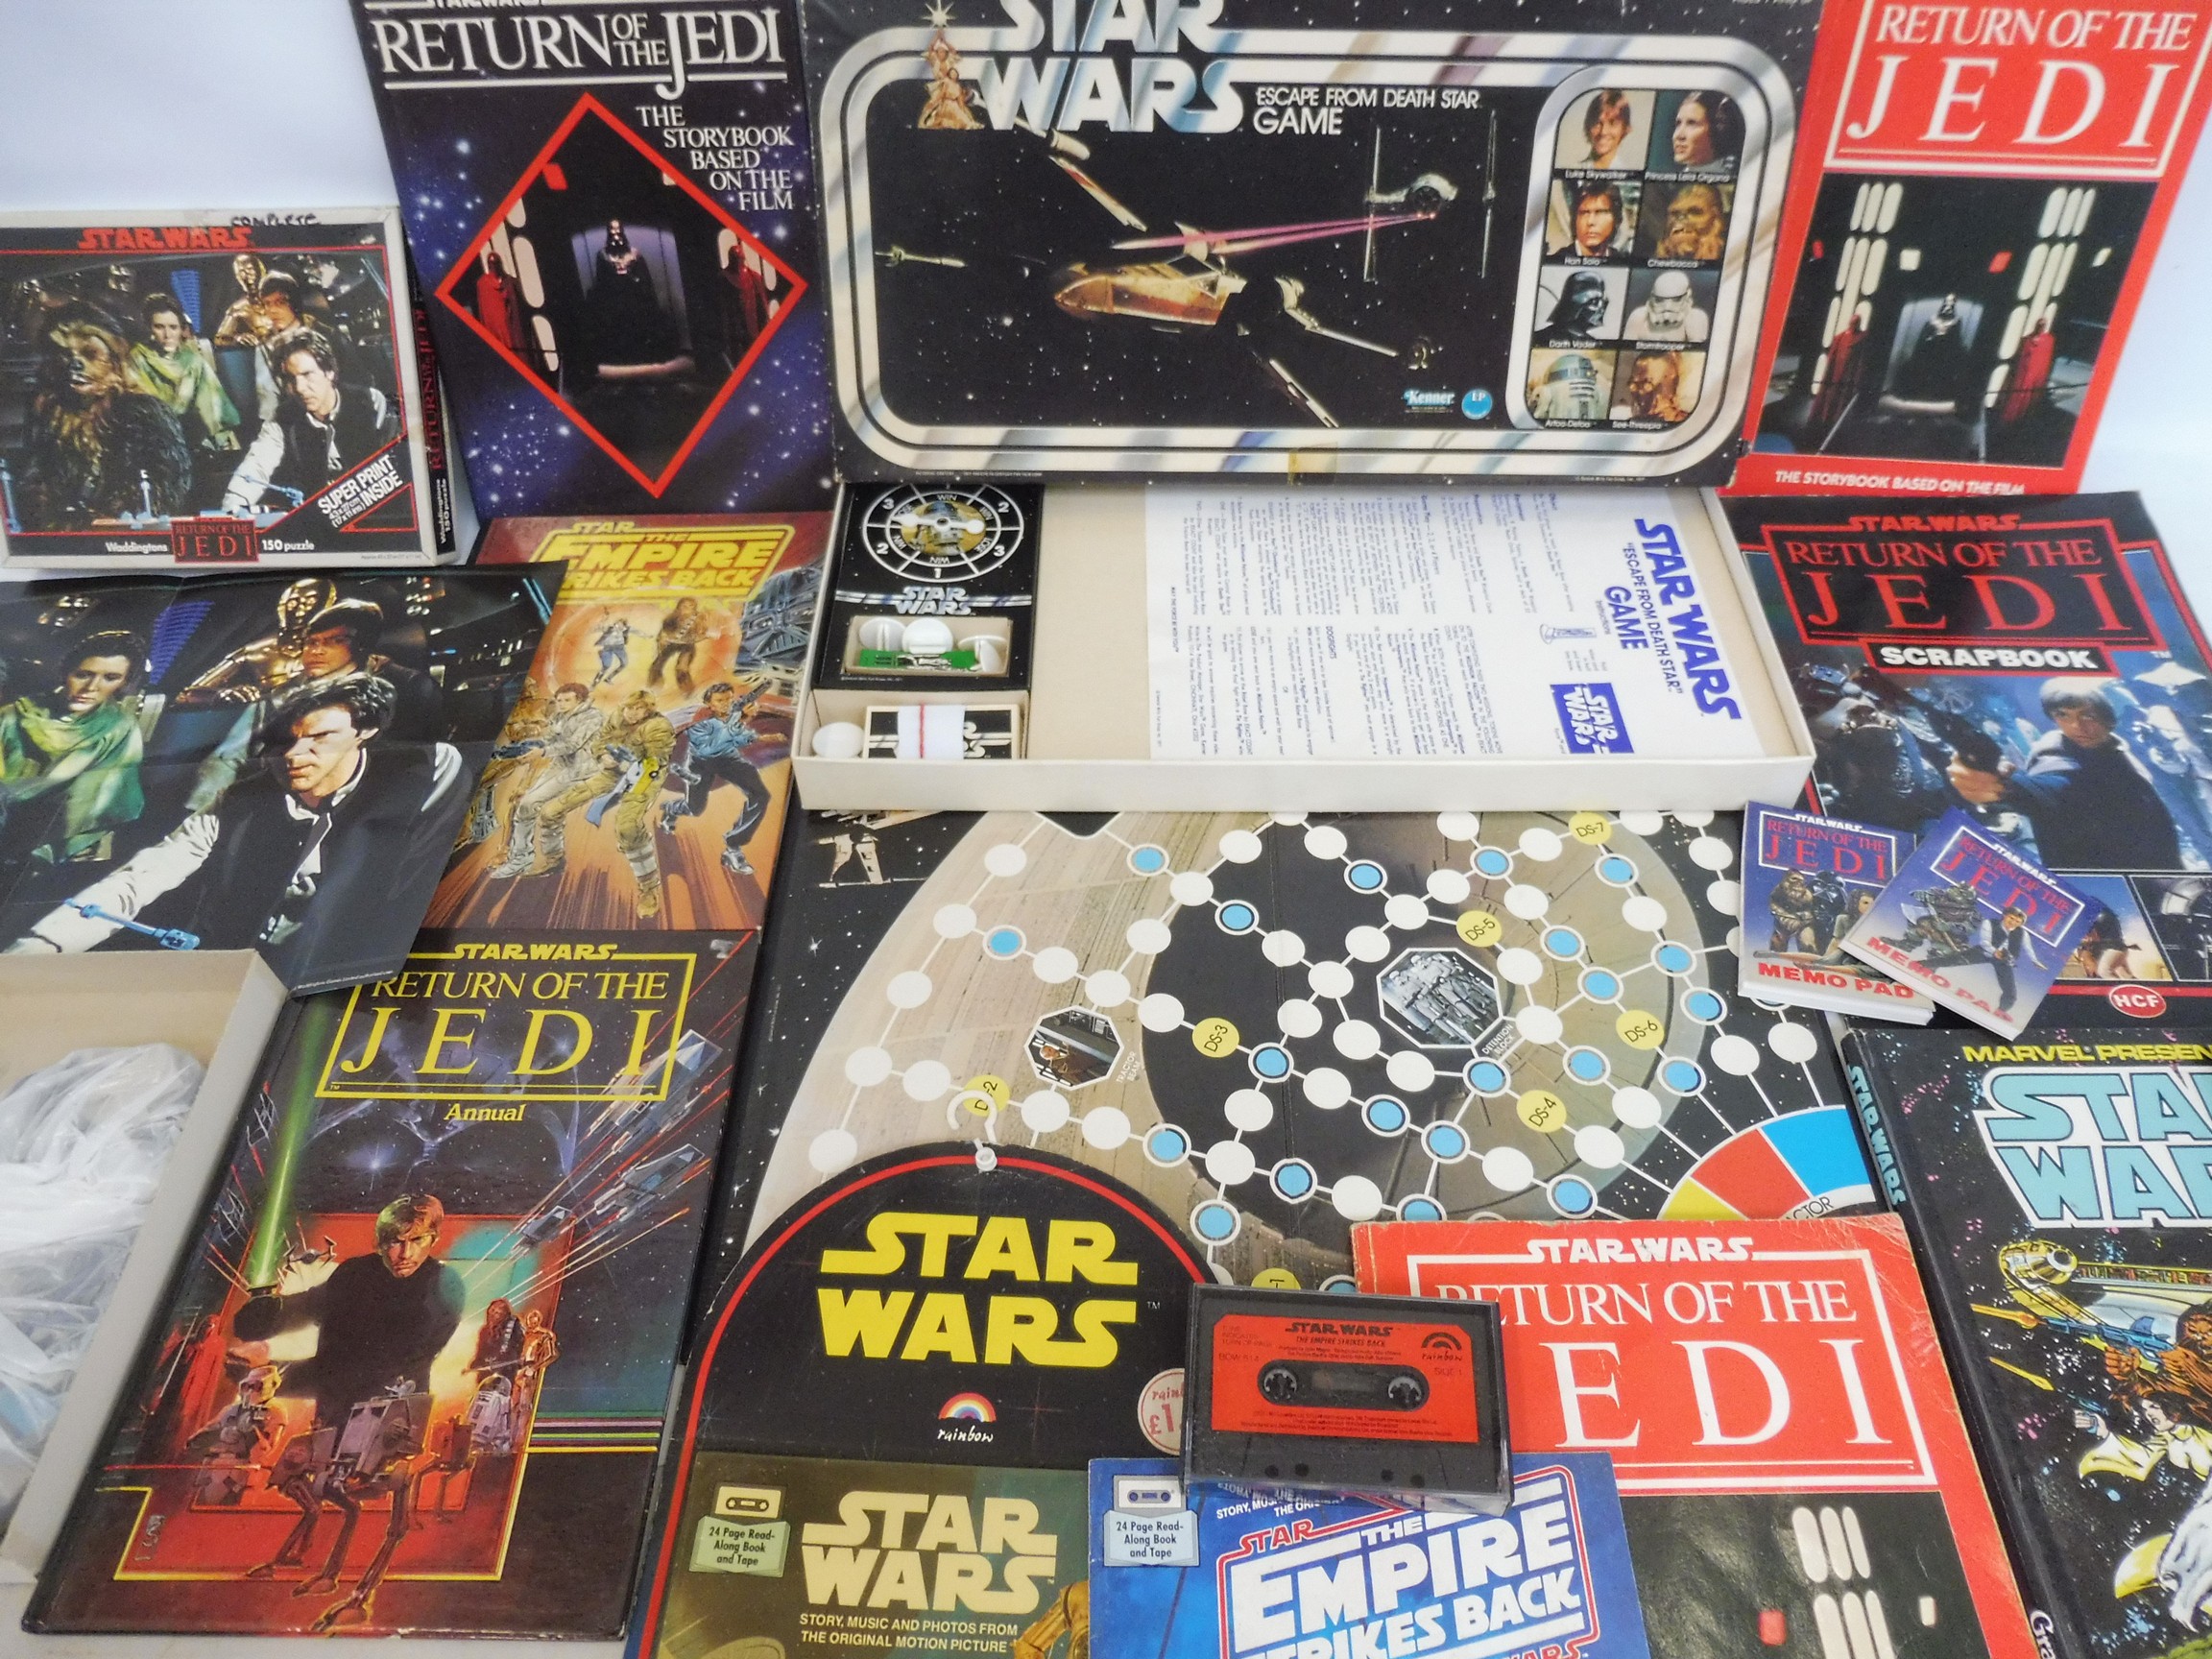 A collection of Star Wars games, merchandise etc.